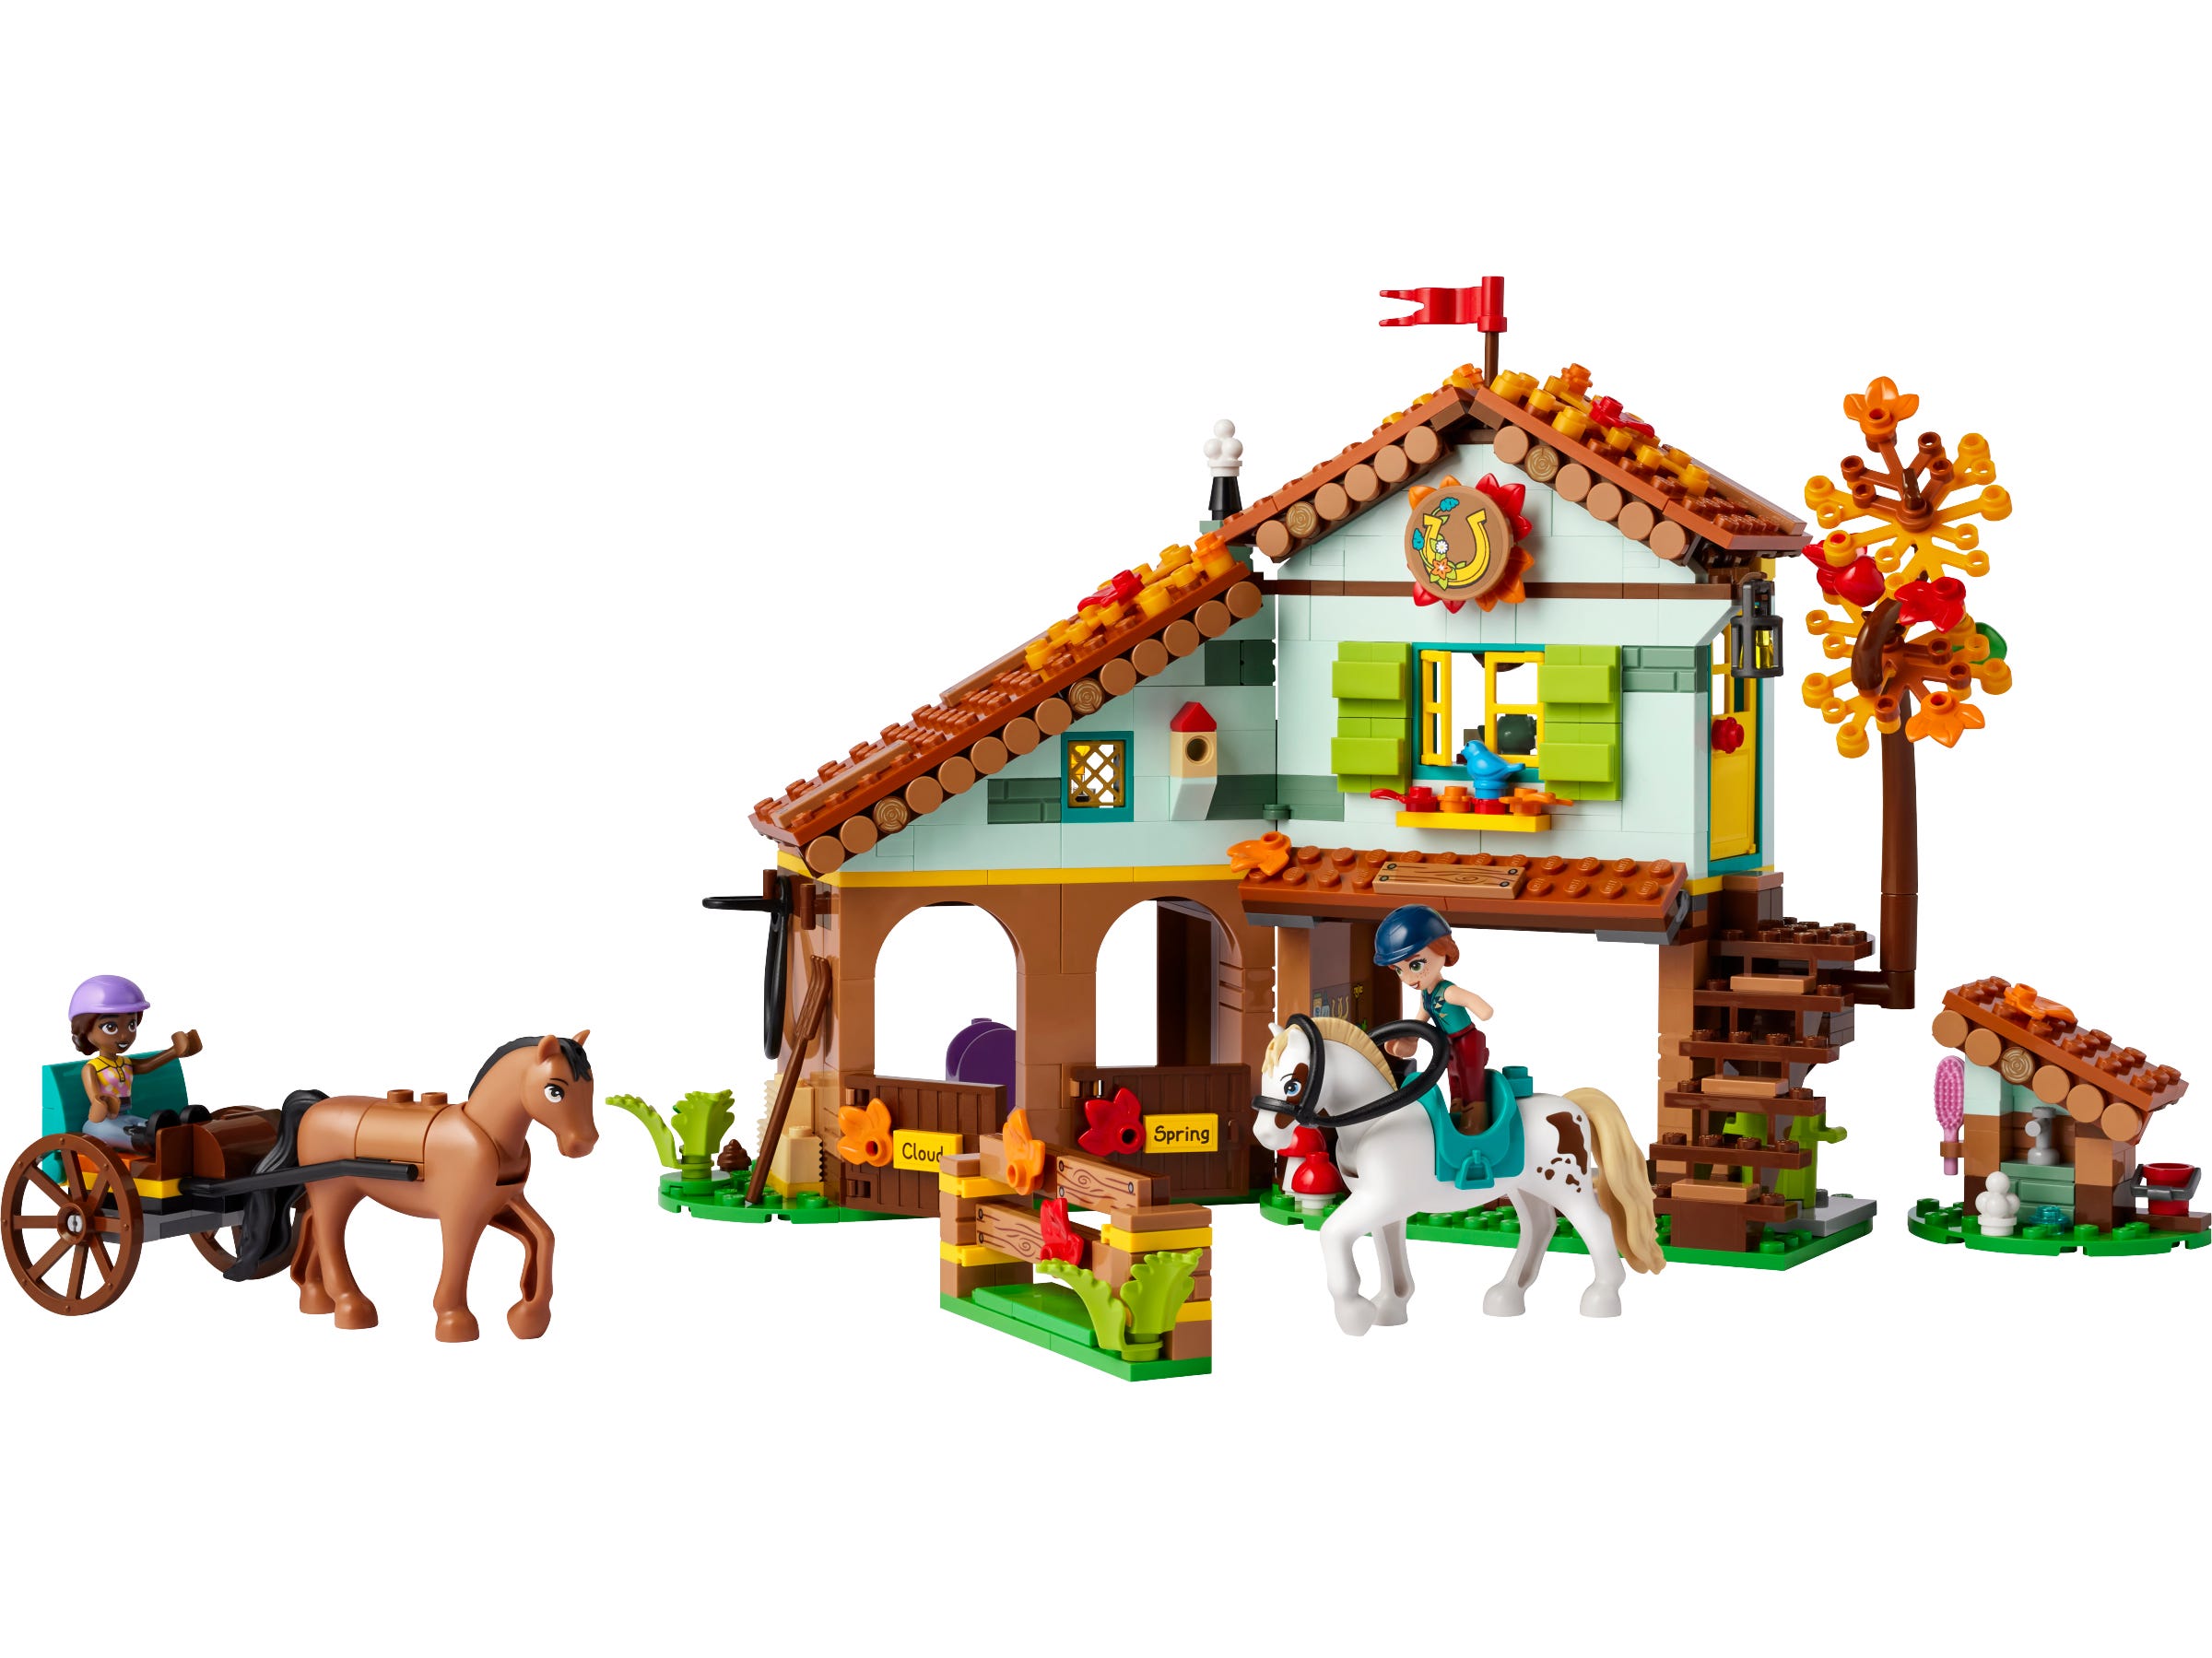 Playmobil 71238 Country Riding Stable, pony Farm, Horse Toys, Fun  Imaginative Role-Play, Playset Suitable for Children Ages 4+ :  : Toys & Games